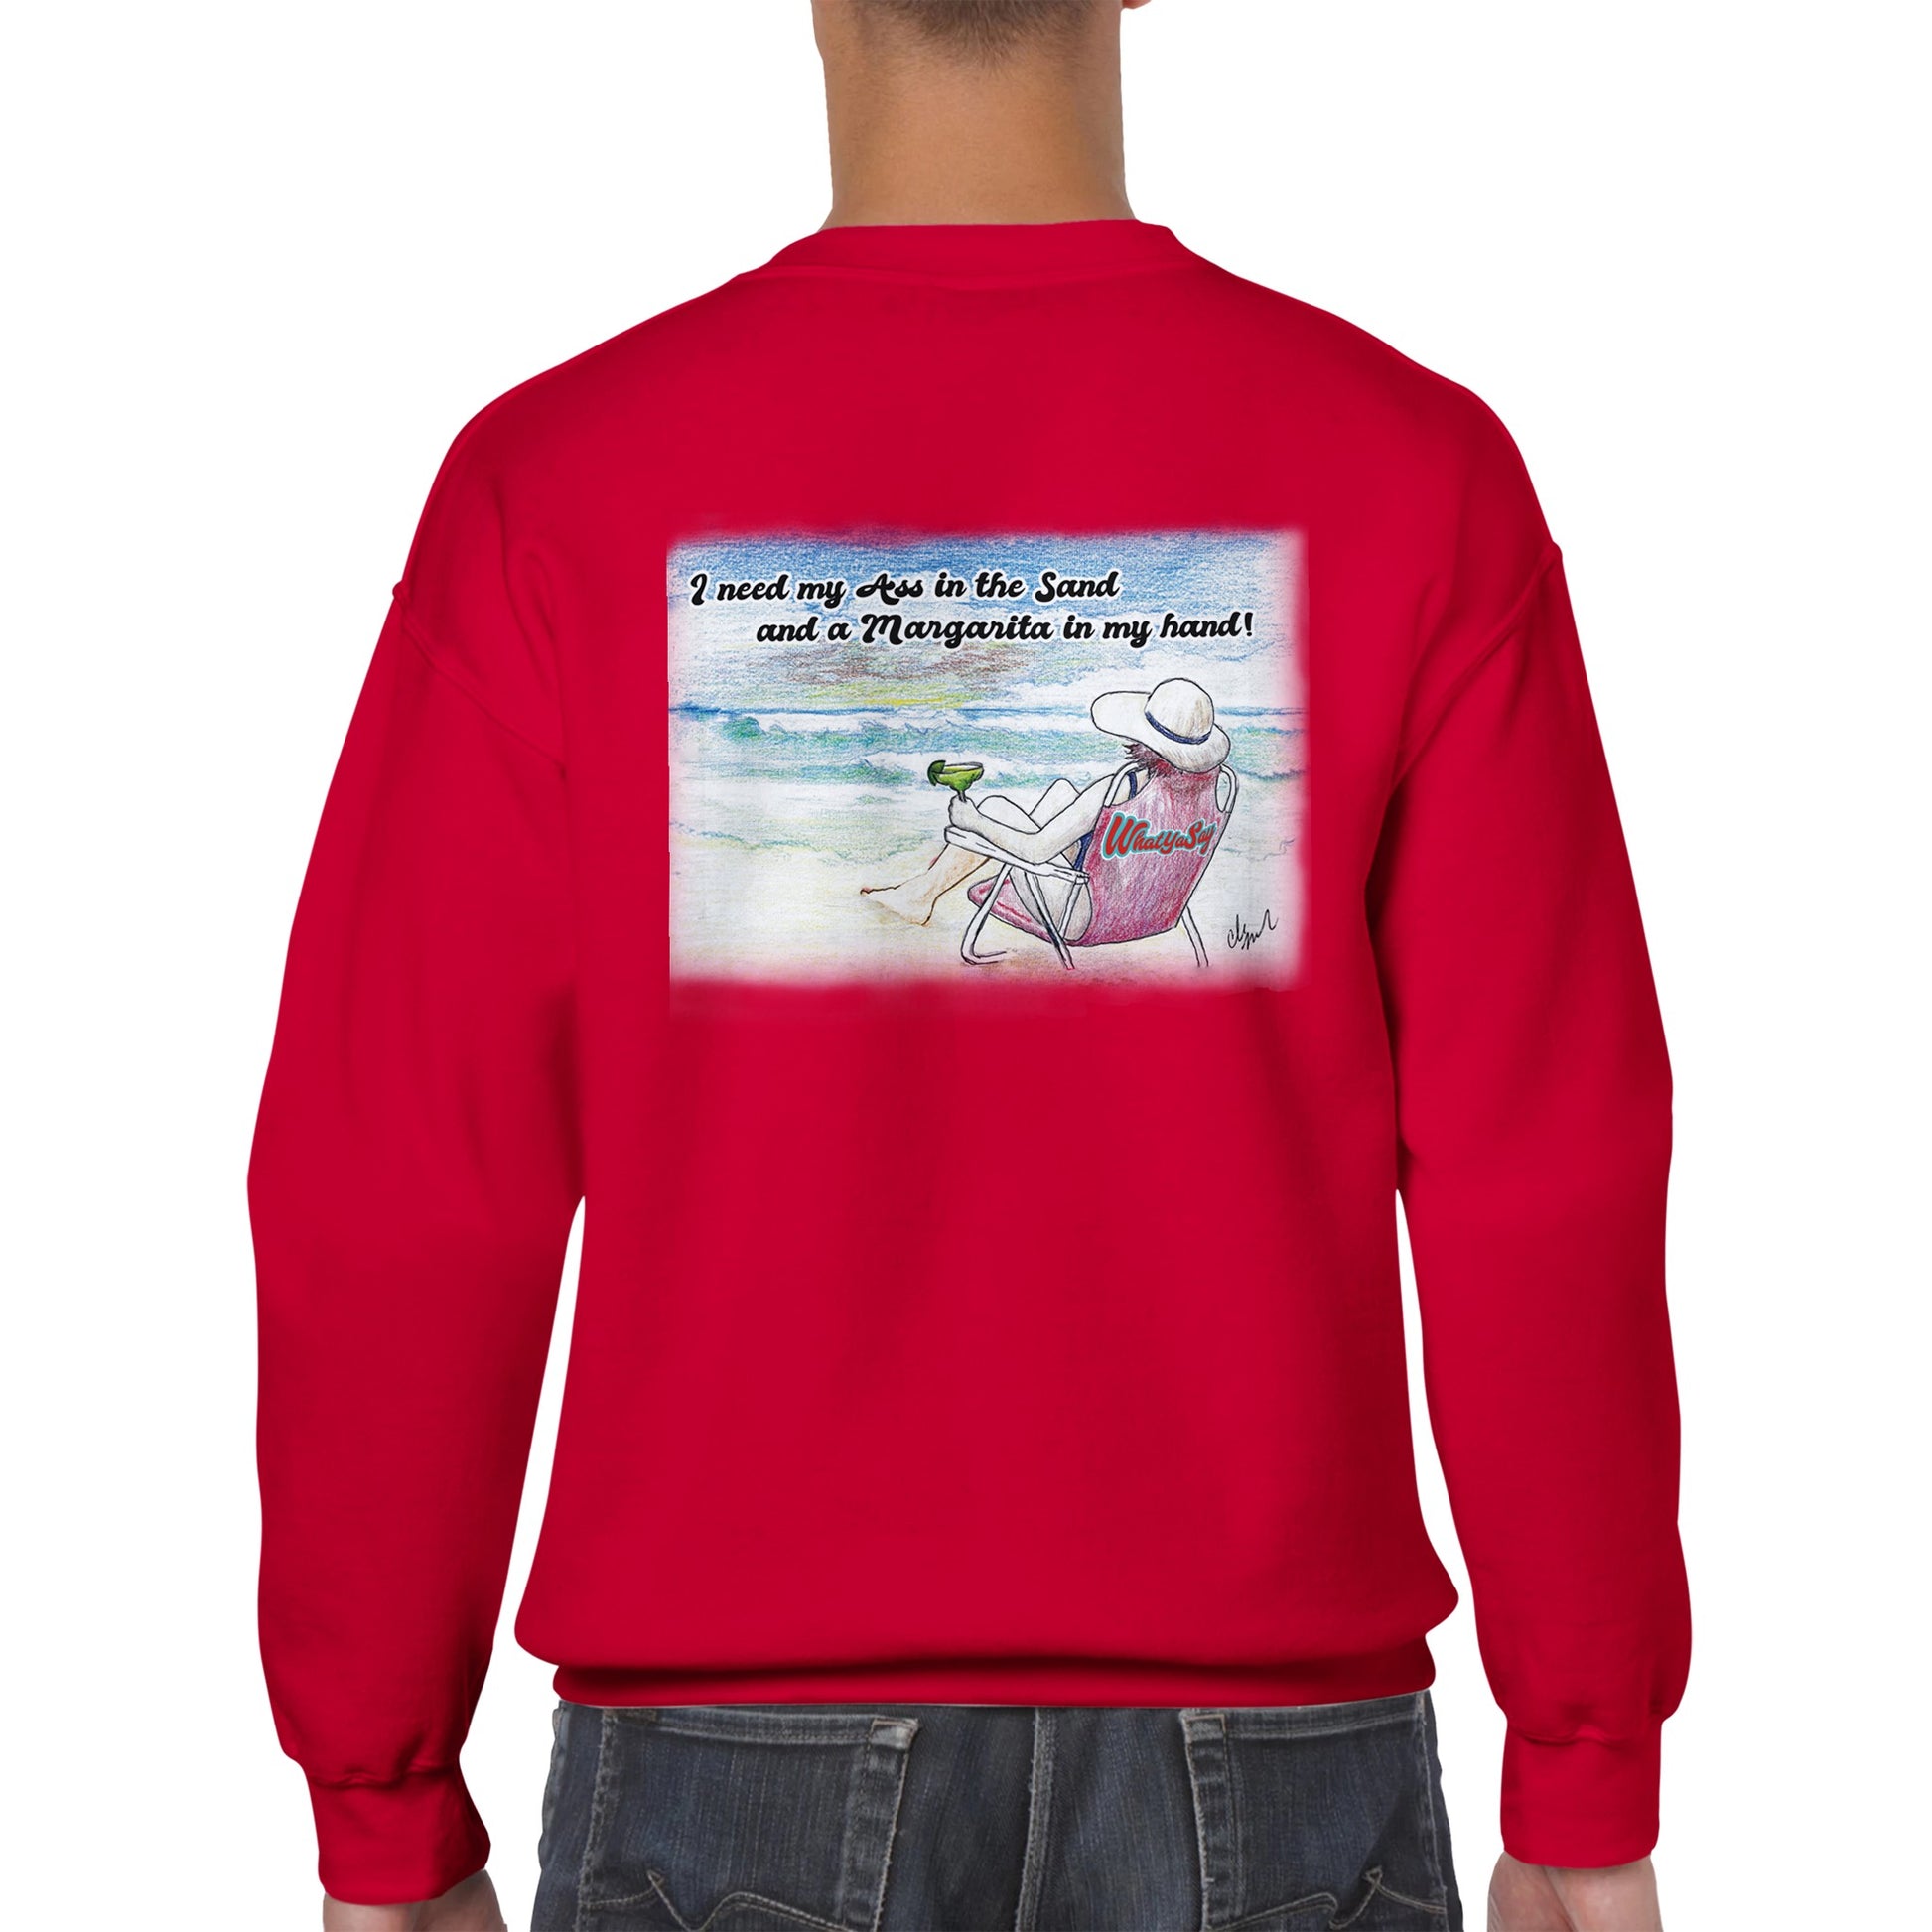 A red Classic Unisex Crewneck sweatshirt with original artwork and motto I need my Ass in the Sand and a Margarita in my Hand on back and Whatya Say logo on front from WhatYa Say Apparel a rear view of short haired male model.